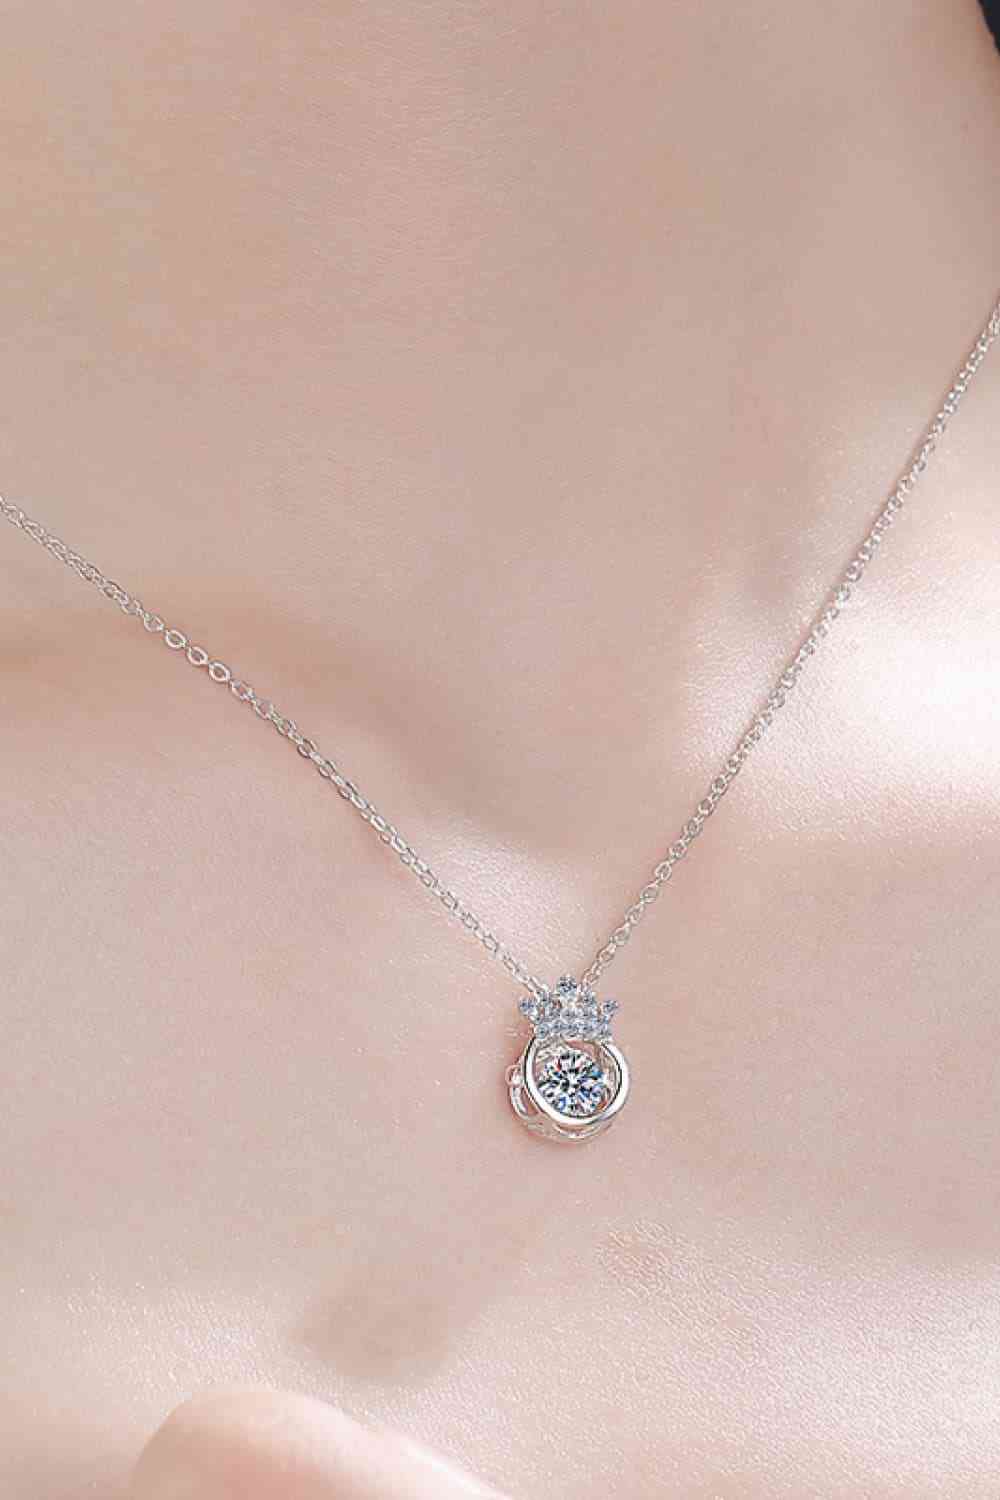 Moissanite 925 Sterling Silver Necklace - Kawaii Stop - 925 Sterling Silver, Christmas, DY-N, Elegant Jewelry, Fashion Statement, Graceful Pendant, Luxury Accessories, Moissanite Necklace, Rhodium-Plated, Ship From Overseas, Sophisticated Necklace, Timeless Elegance, Versatile Necklace, Zircon Accent